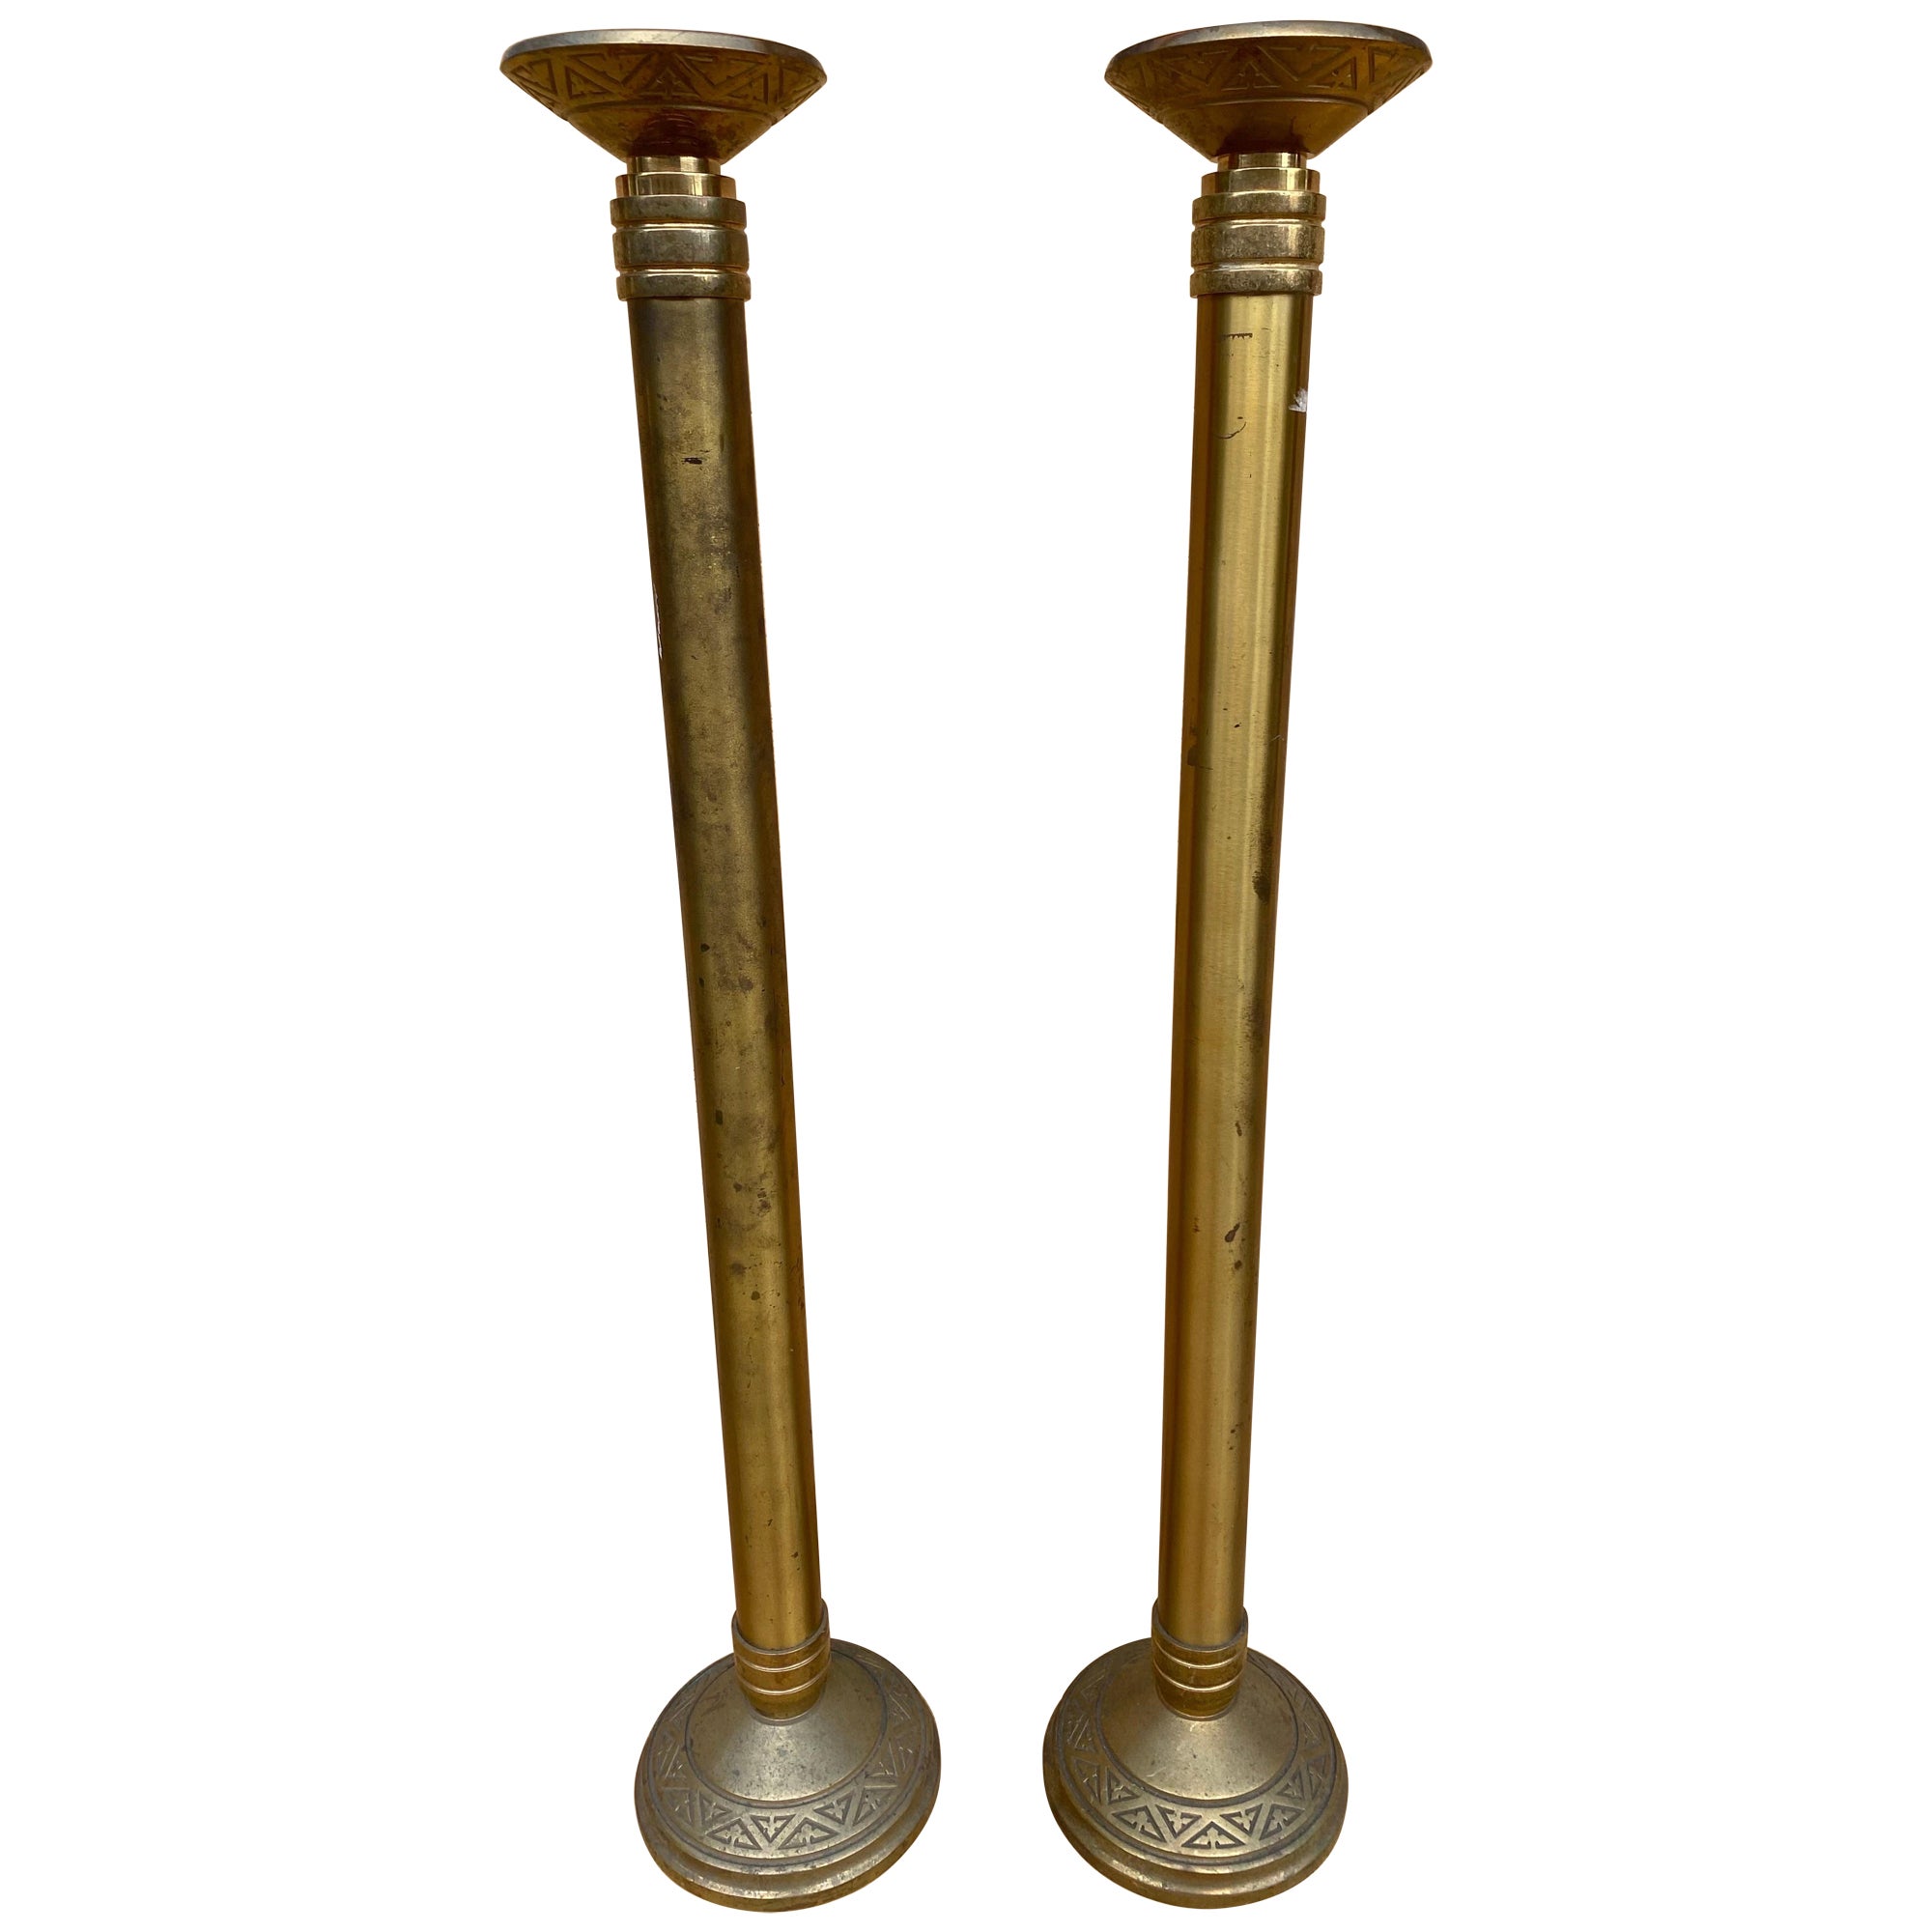 Antique Church Altar Floor Candle Holders For Sale